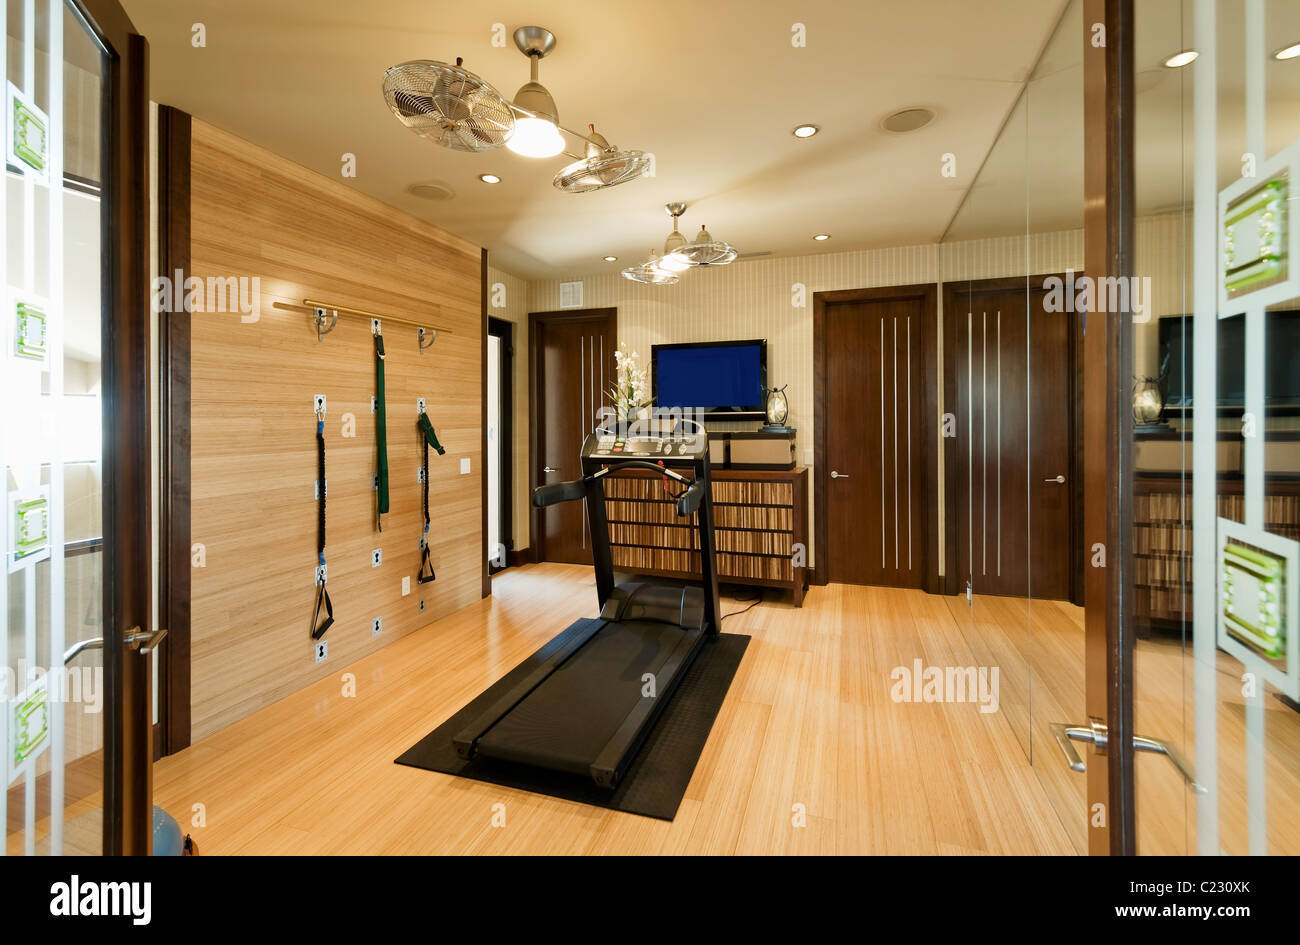 Interior With Gym Equipment And Wooden Floor Stock Photo 35716651